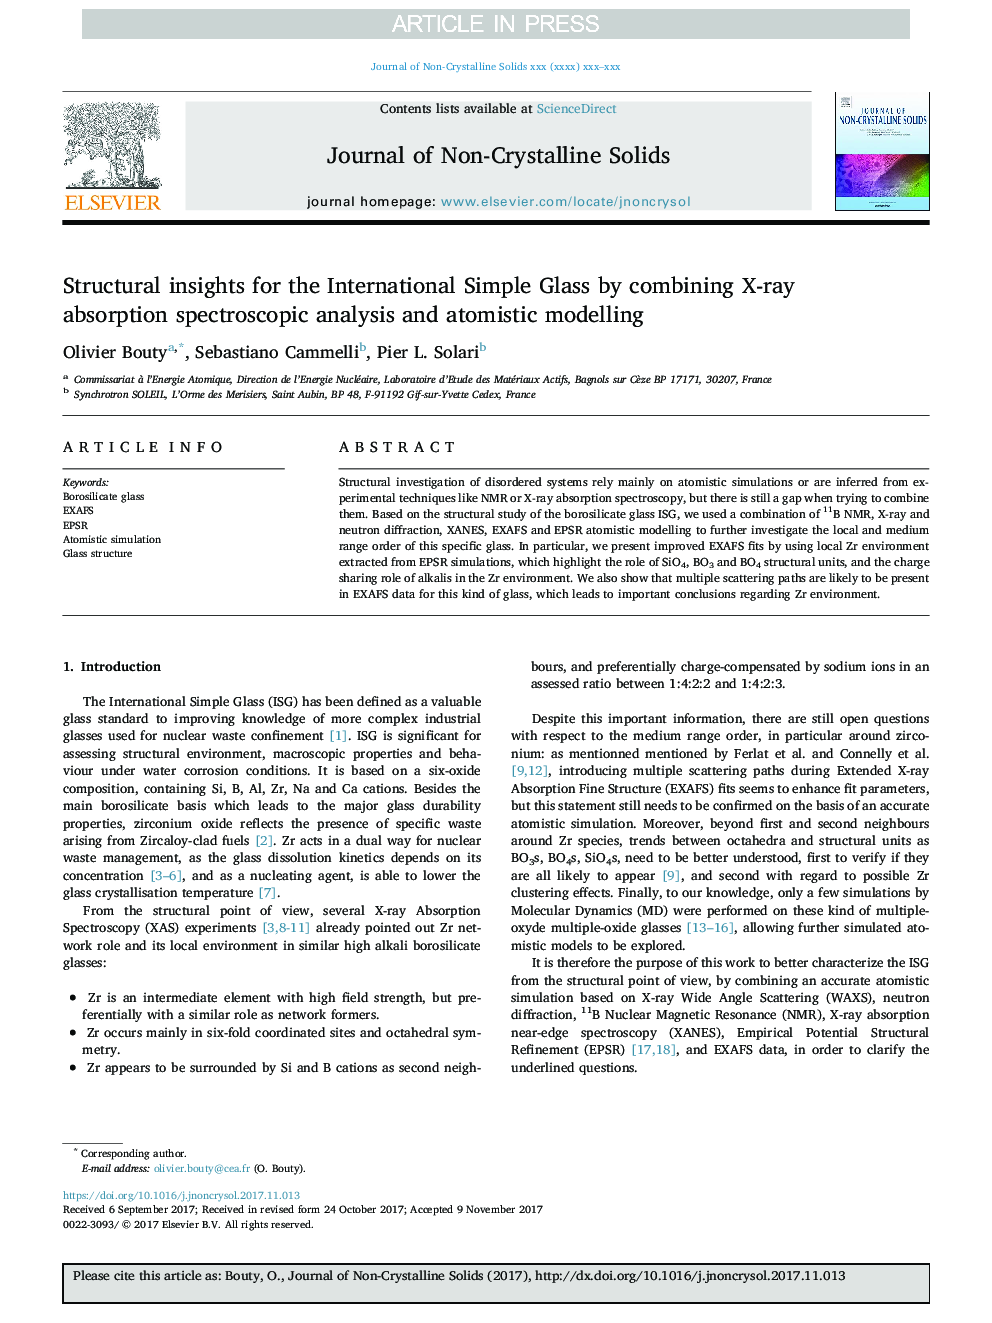 Structural insights for the International Simple Glass by combining X-ray absorption spectroscopic analysis and atomistic modelling